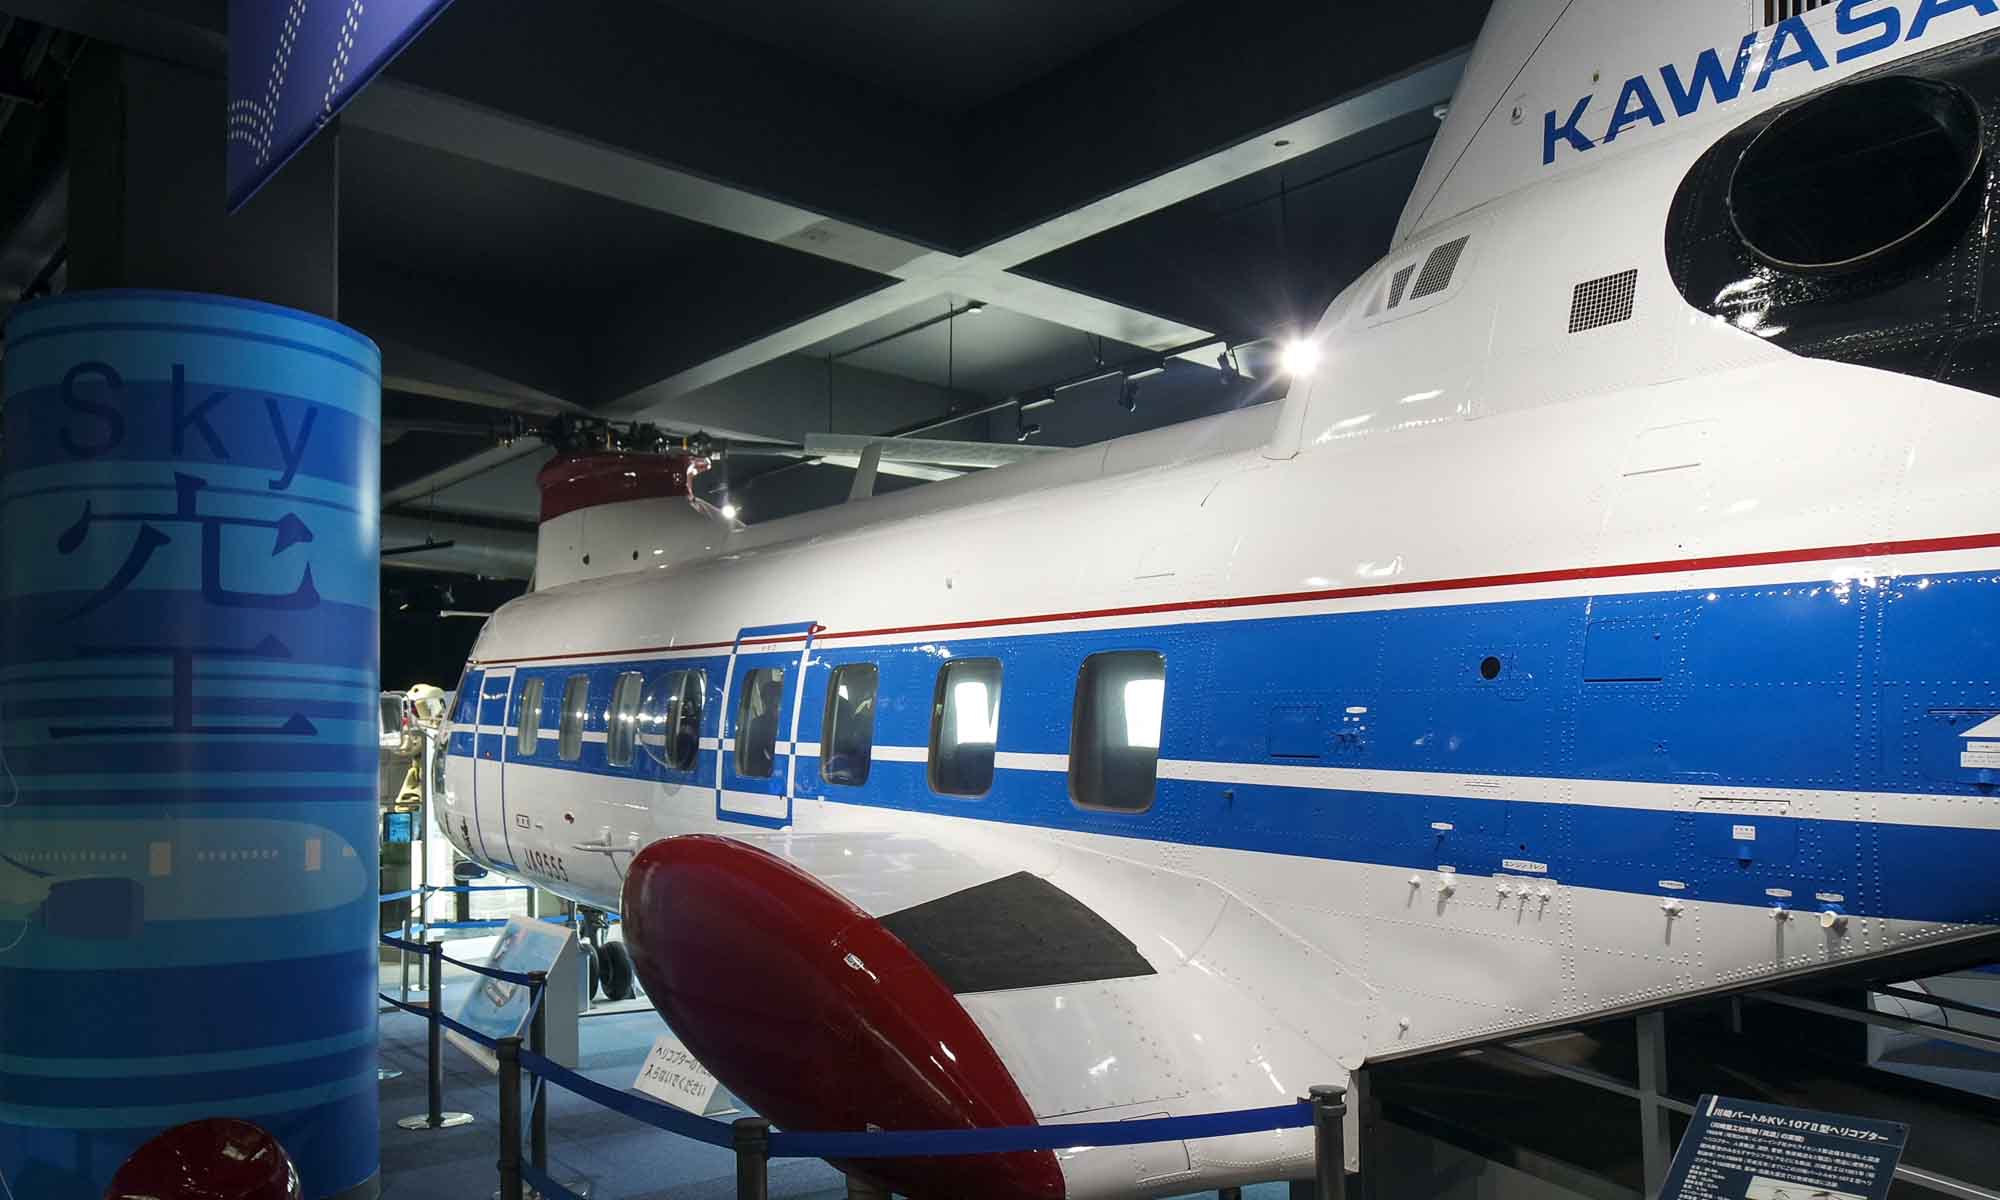 Kawasaki also builds helicopters, planes, ships, industrial robots and (high-speed) trains